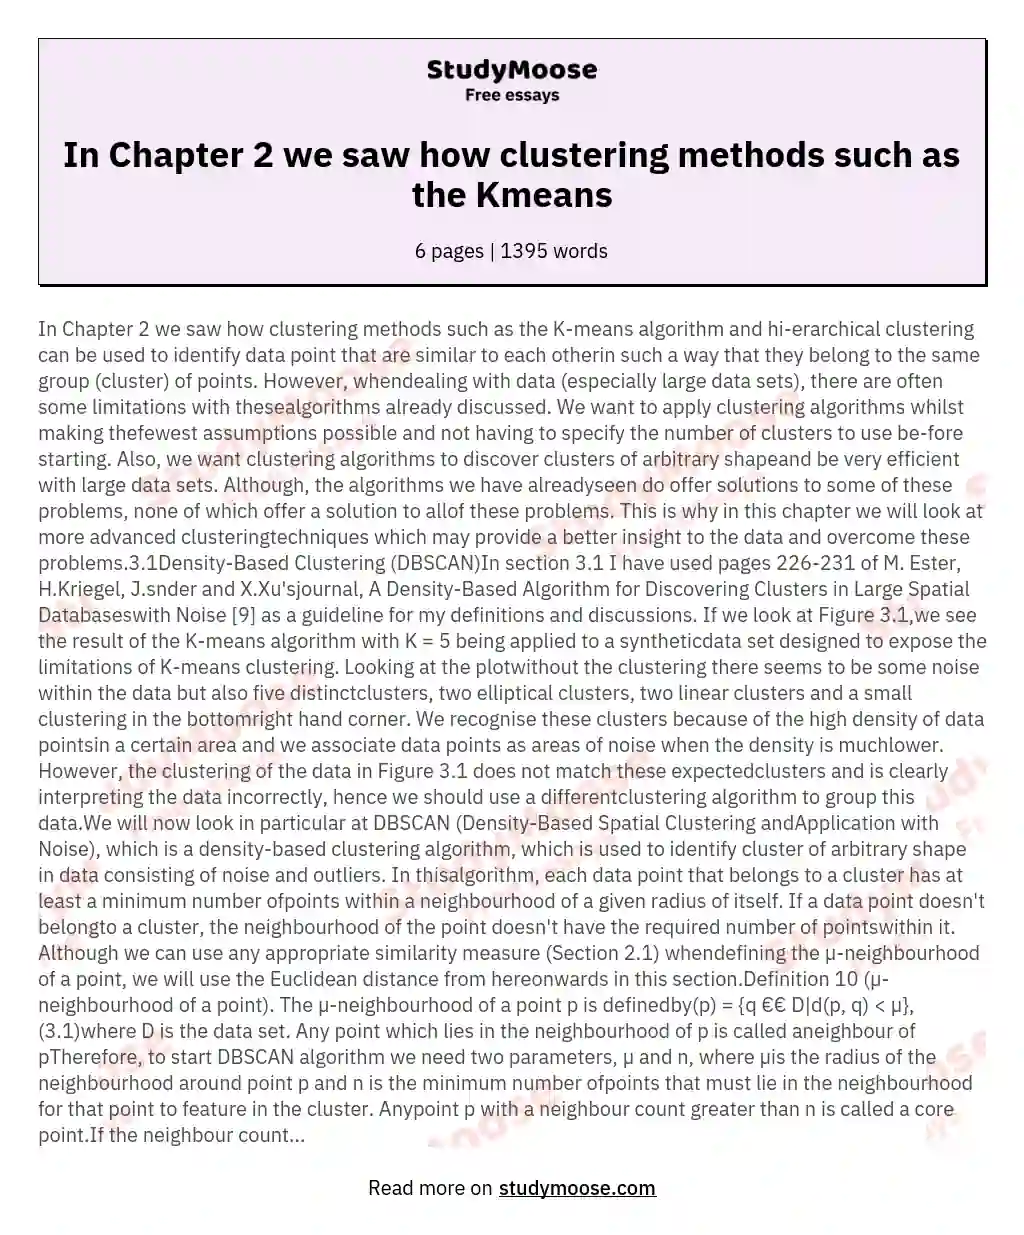 In Chapter 2 we saw how clustering methods such as the Kmeans